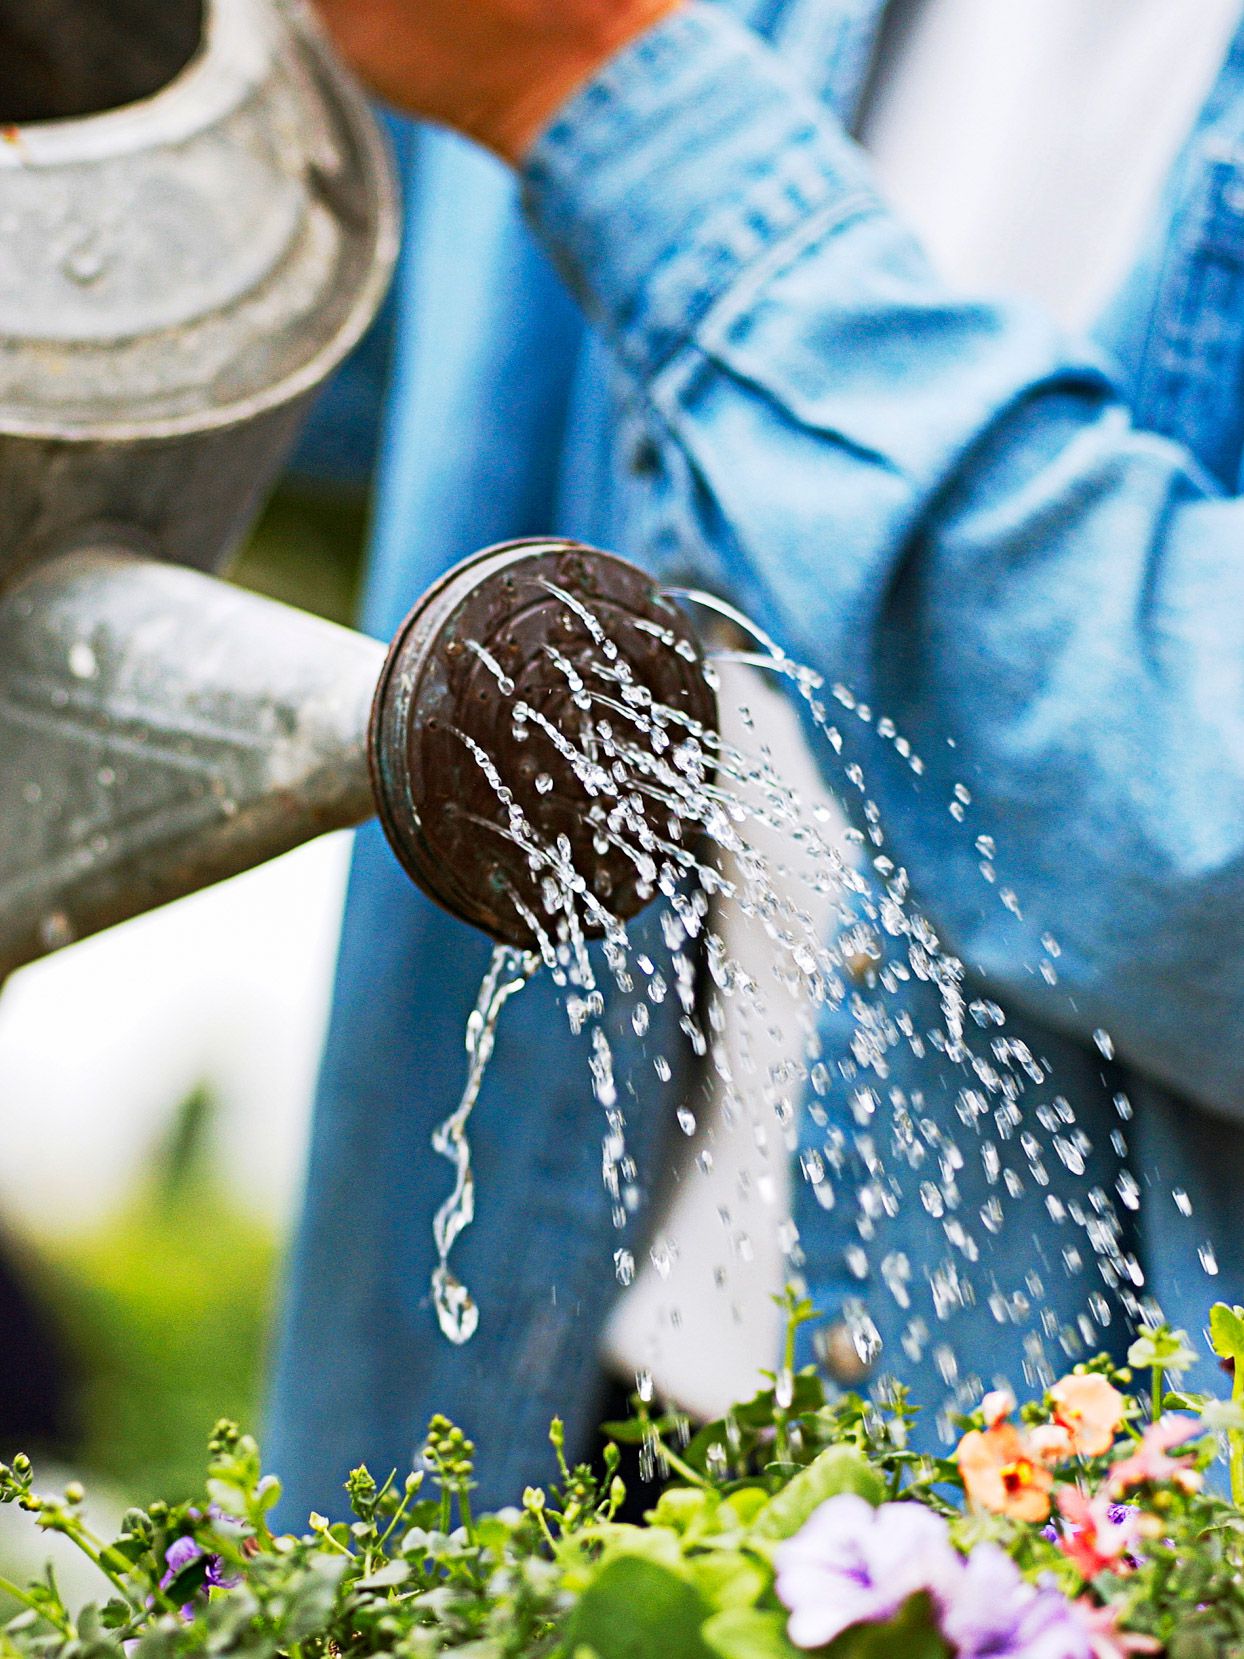 What's the Best Watering Schedule for Your Vegetable Garden in Hot Weather?